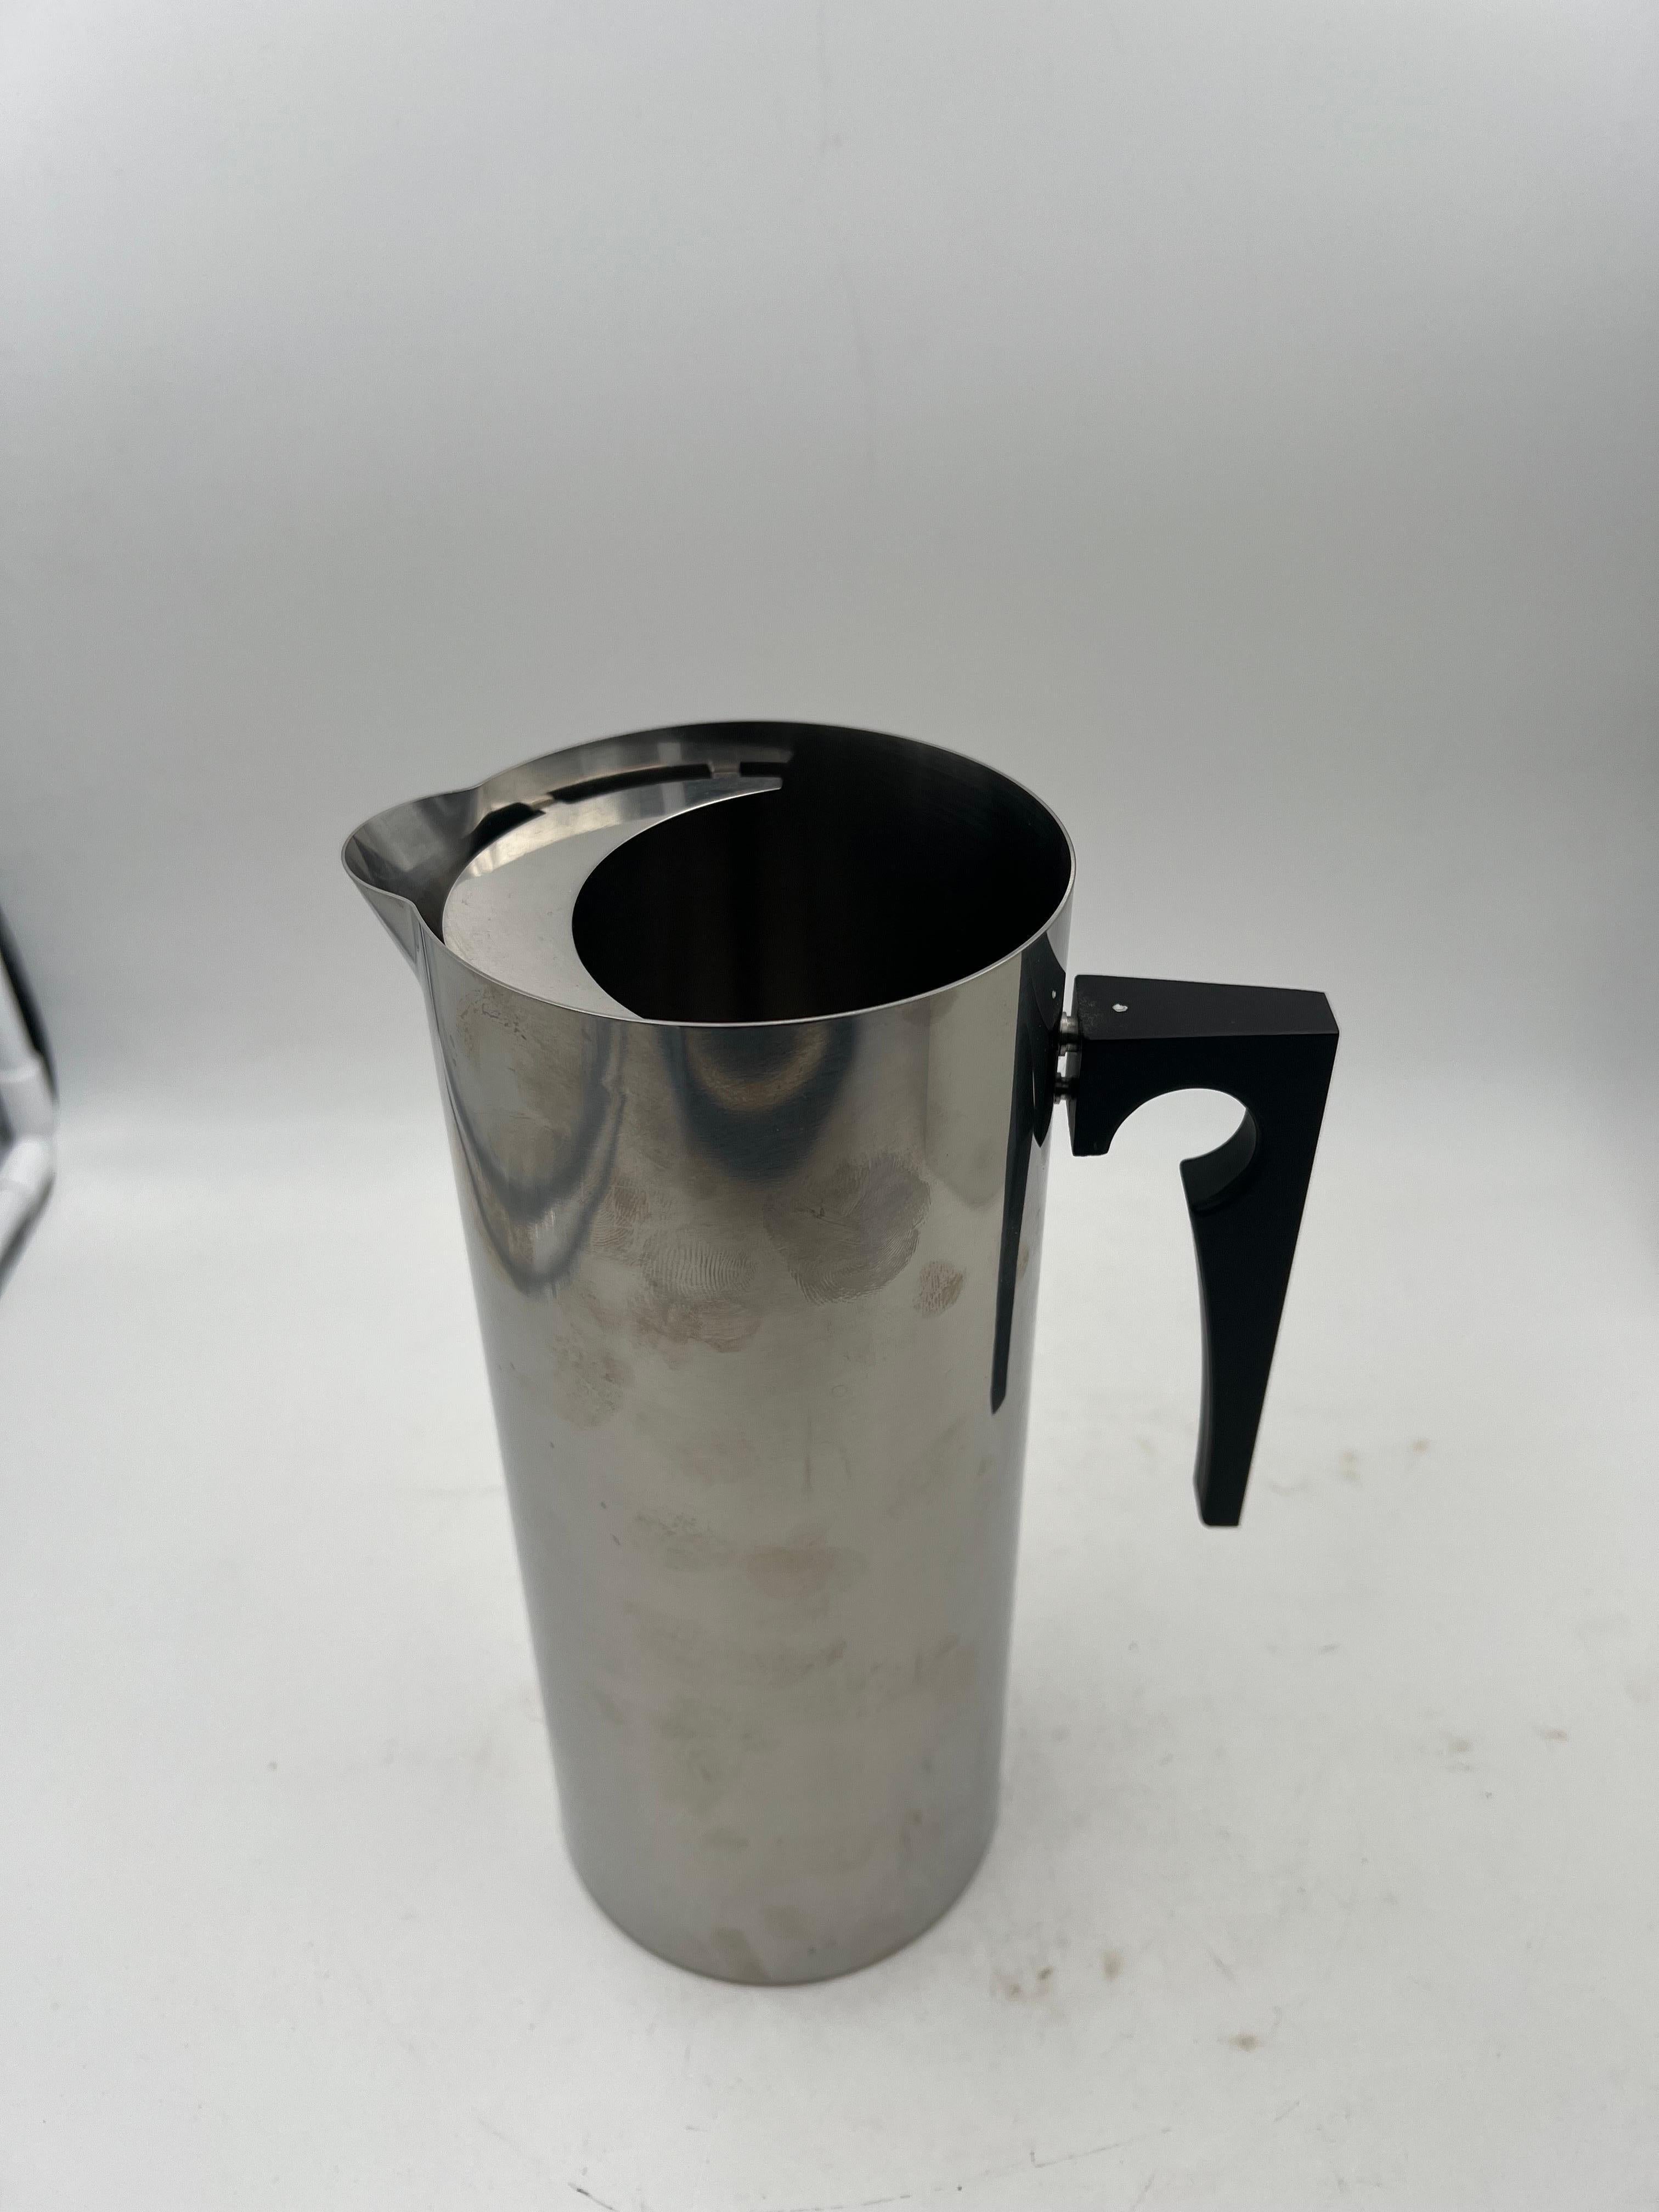 Danish Modern Arne Jacobsen Serving Jug by Stelton Cylinda Line In Excellent Condition For Sale In San Diego, CA